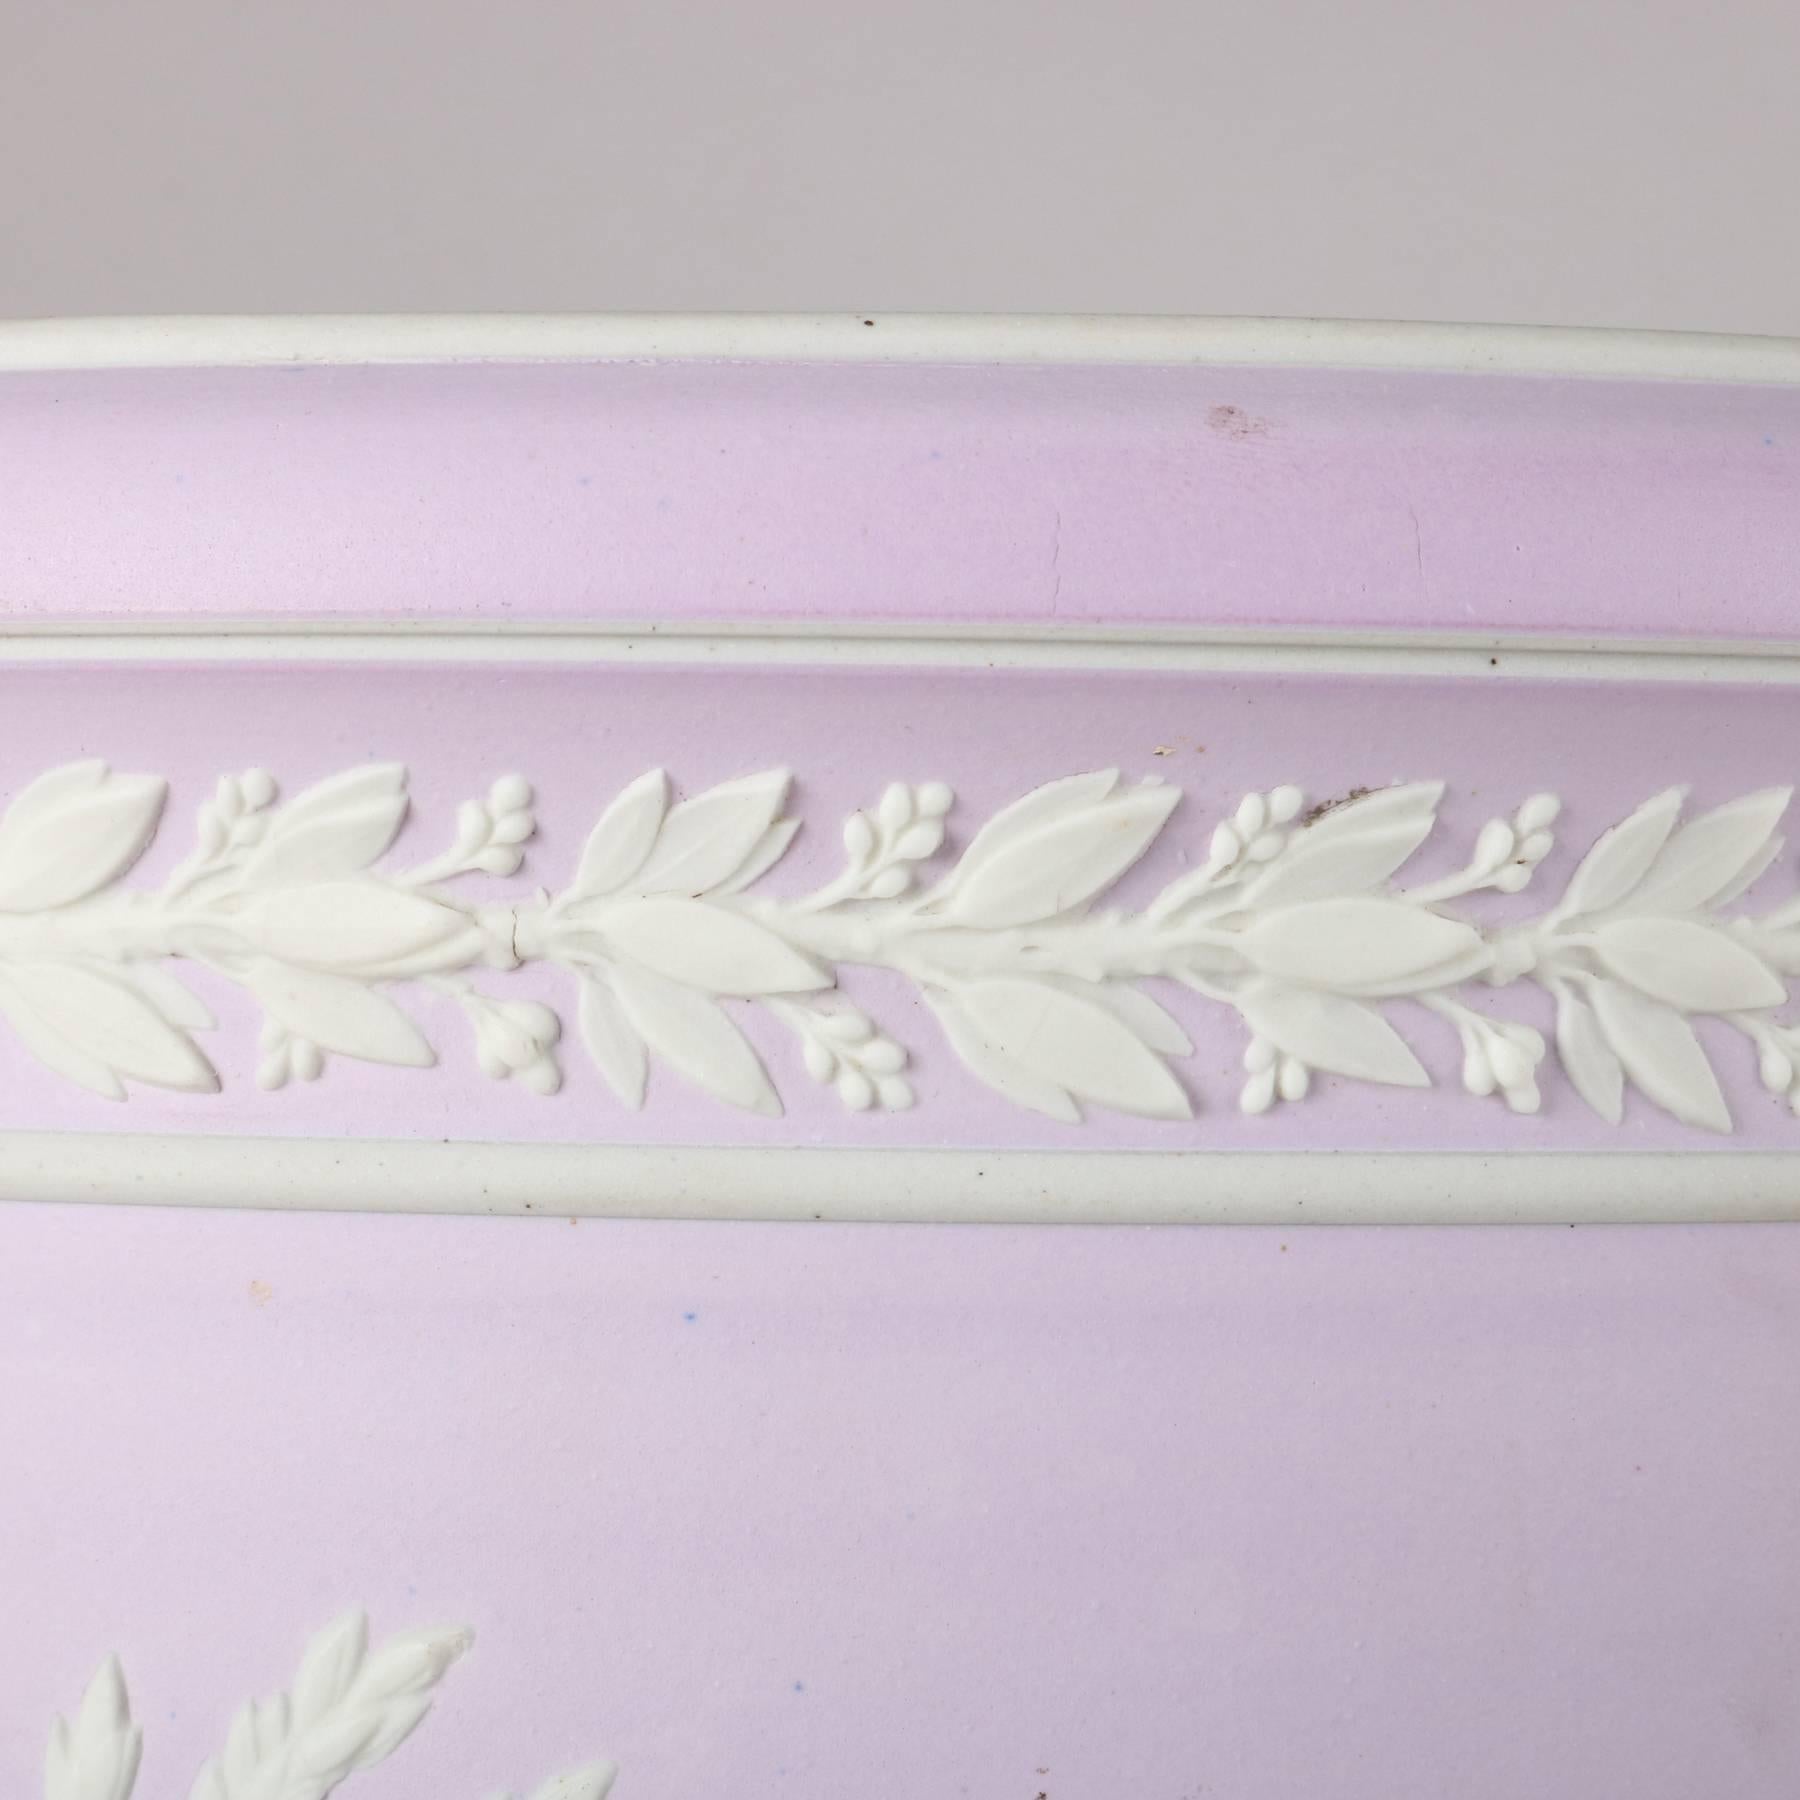 Antique English wedgewood school lilac porcelain planter (or small jardinière) features ivory Jasperware style motif of cherubs and classical figures in garden setting, 19th century.

Measures: 8.5